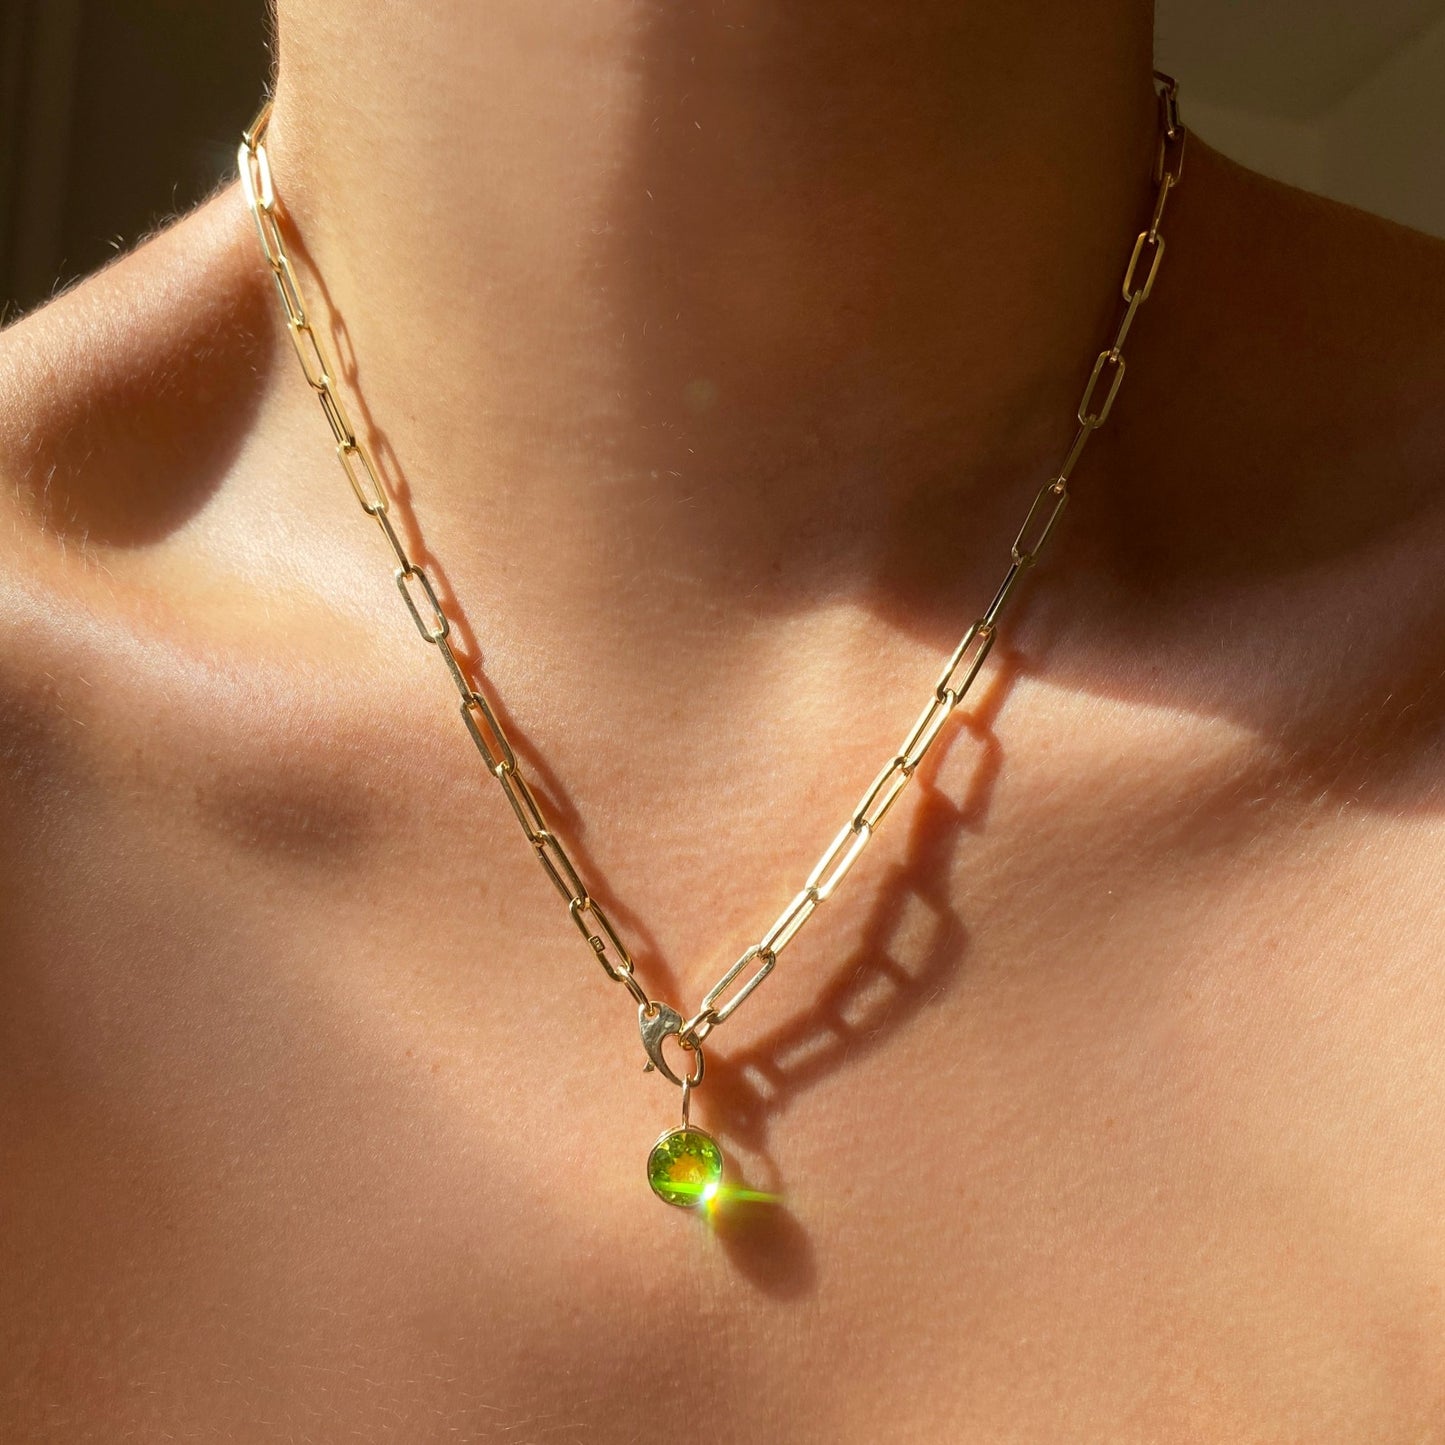 14k gold Peridot Round Solitaire Charm. Styled on a neck hanging from the lobster clasp of a paperclip chain necklace.